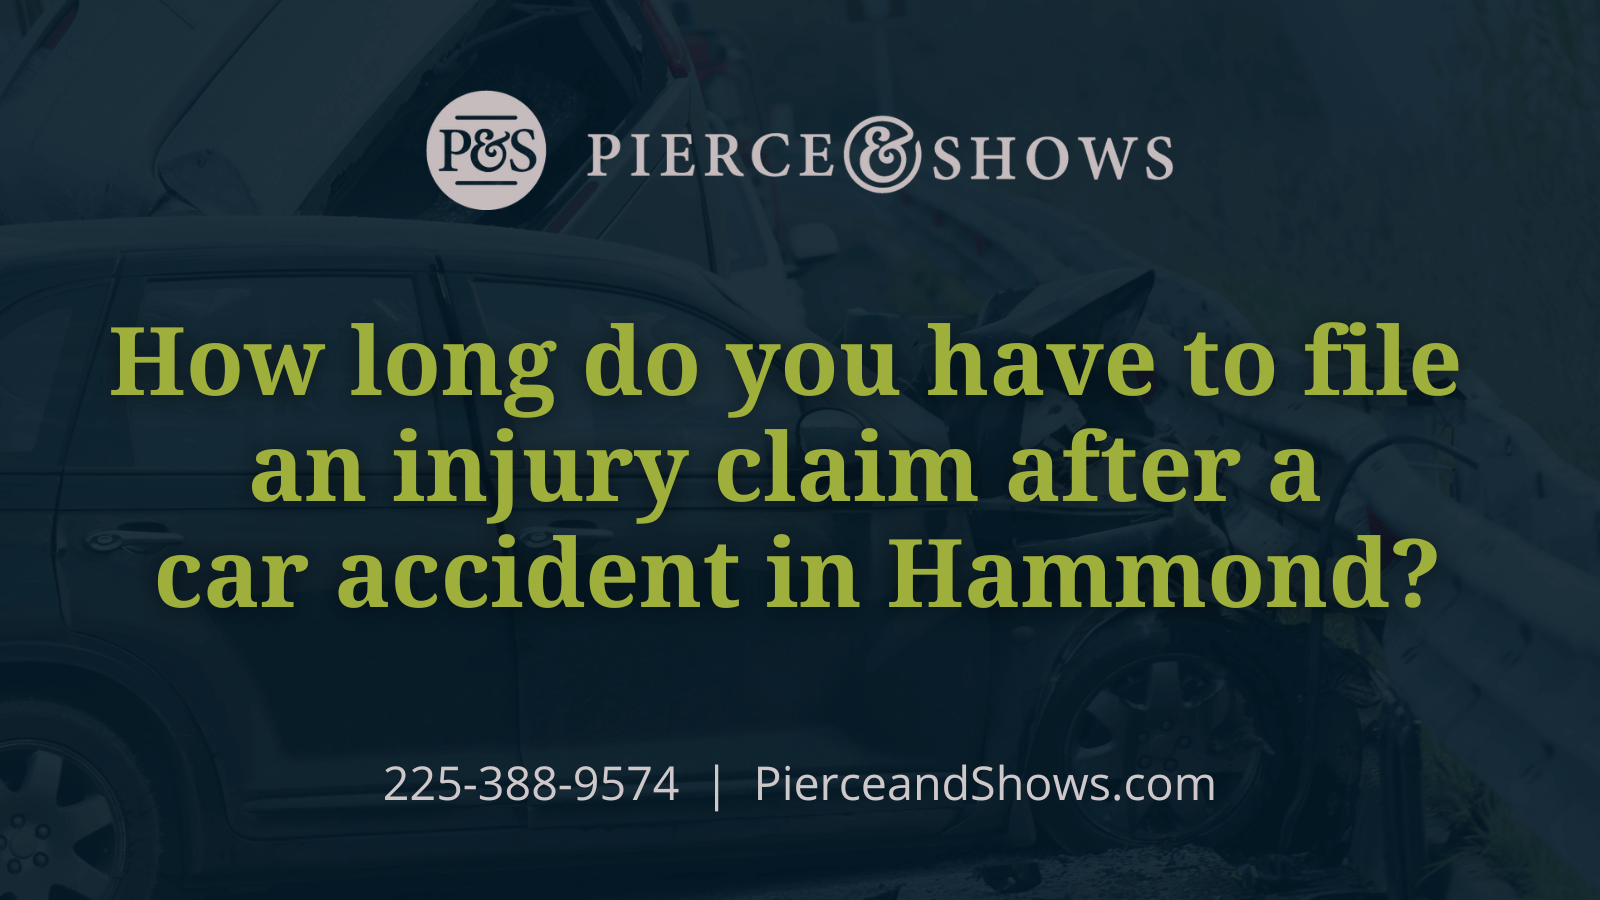 How long do you have to file an injury claim after a car accident in Hammond? - Baton Rouge Louisiana injury attorney Pierce & Shows